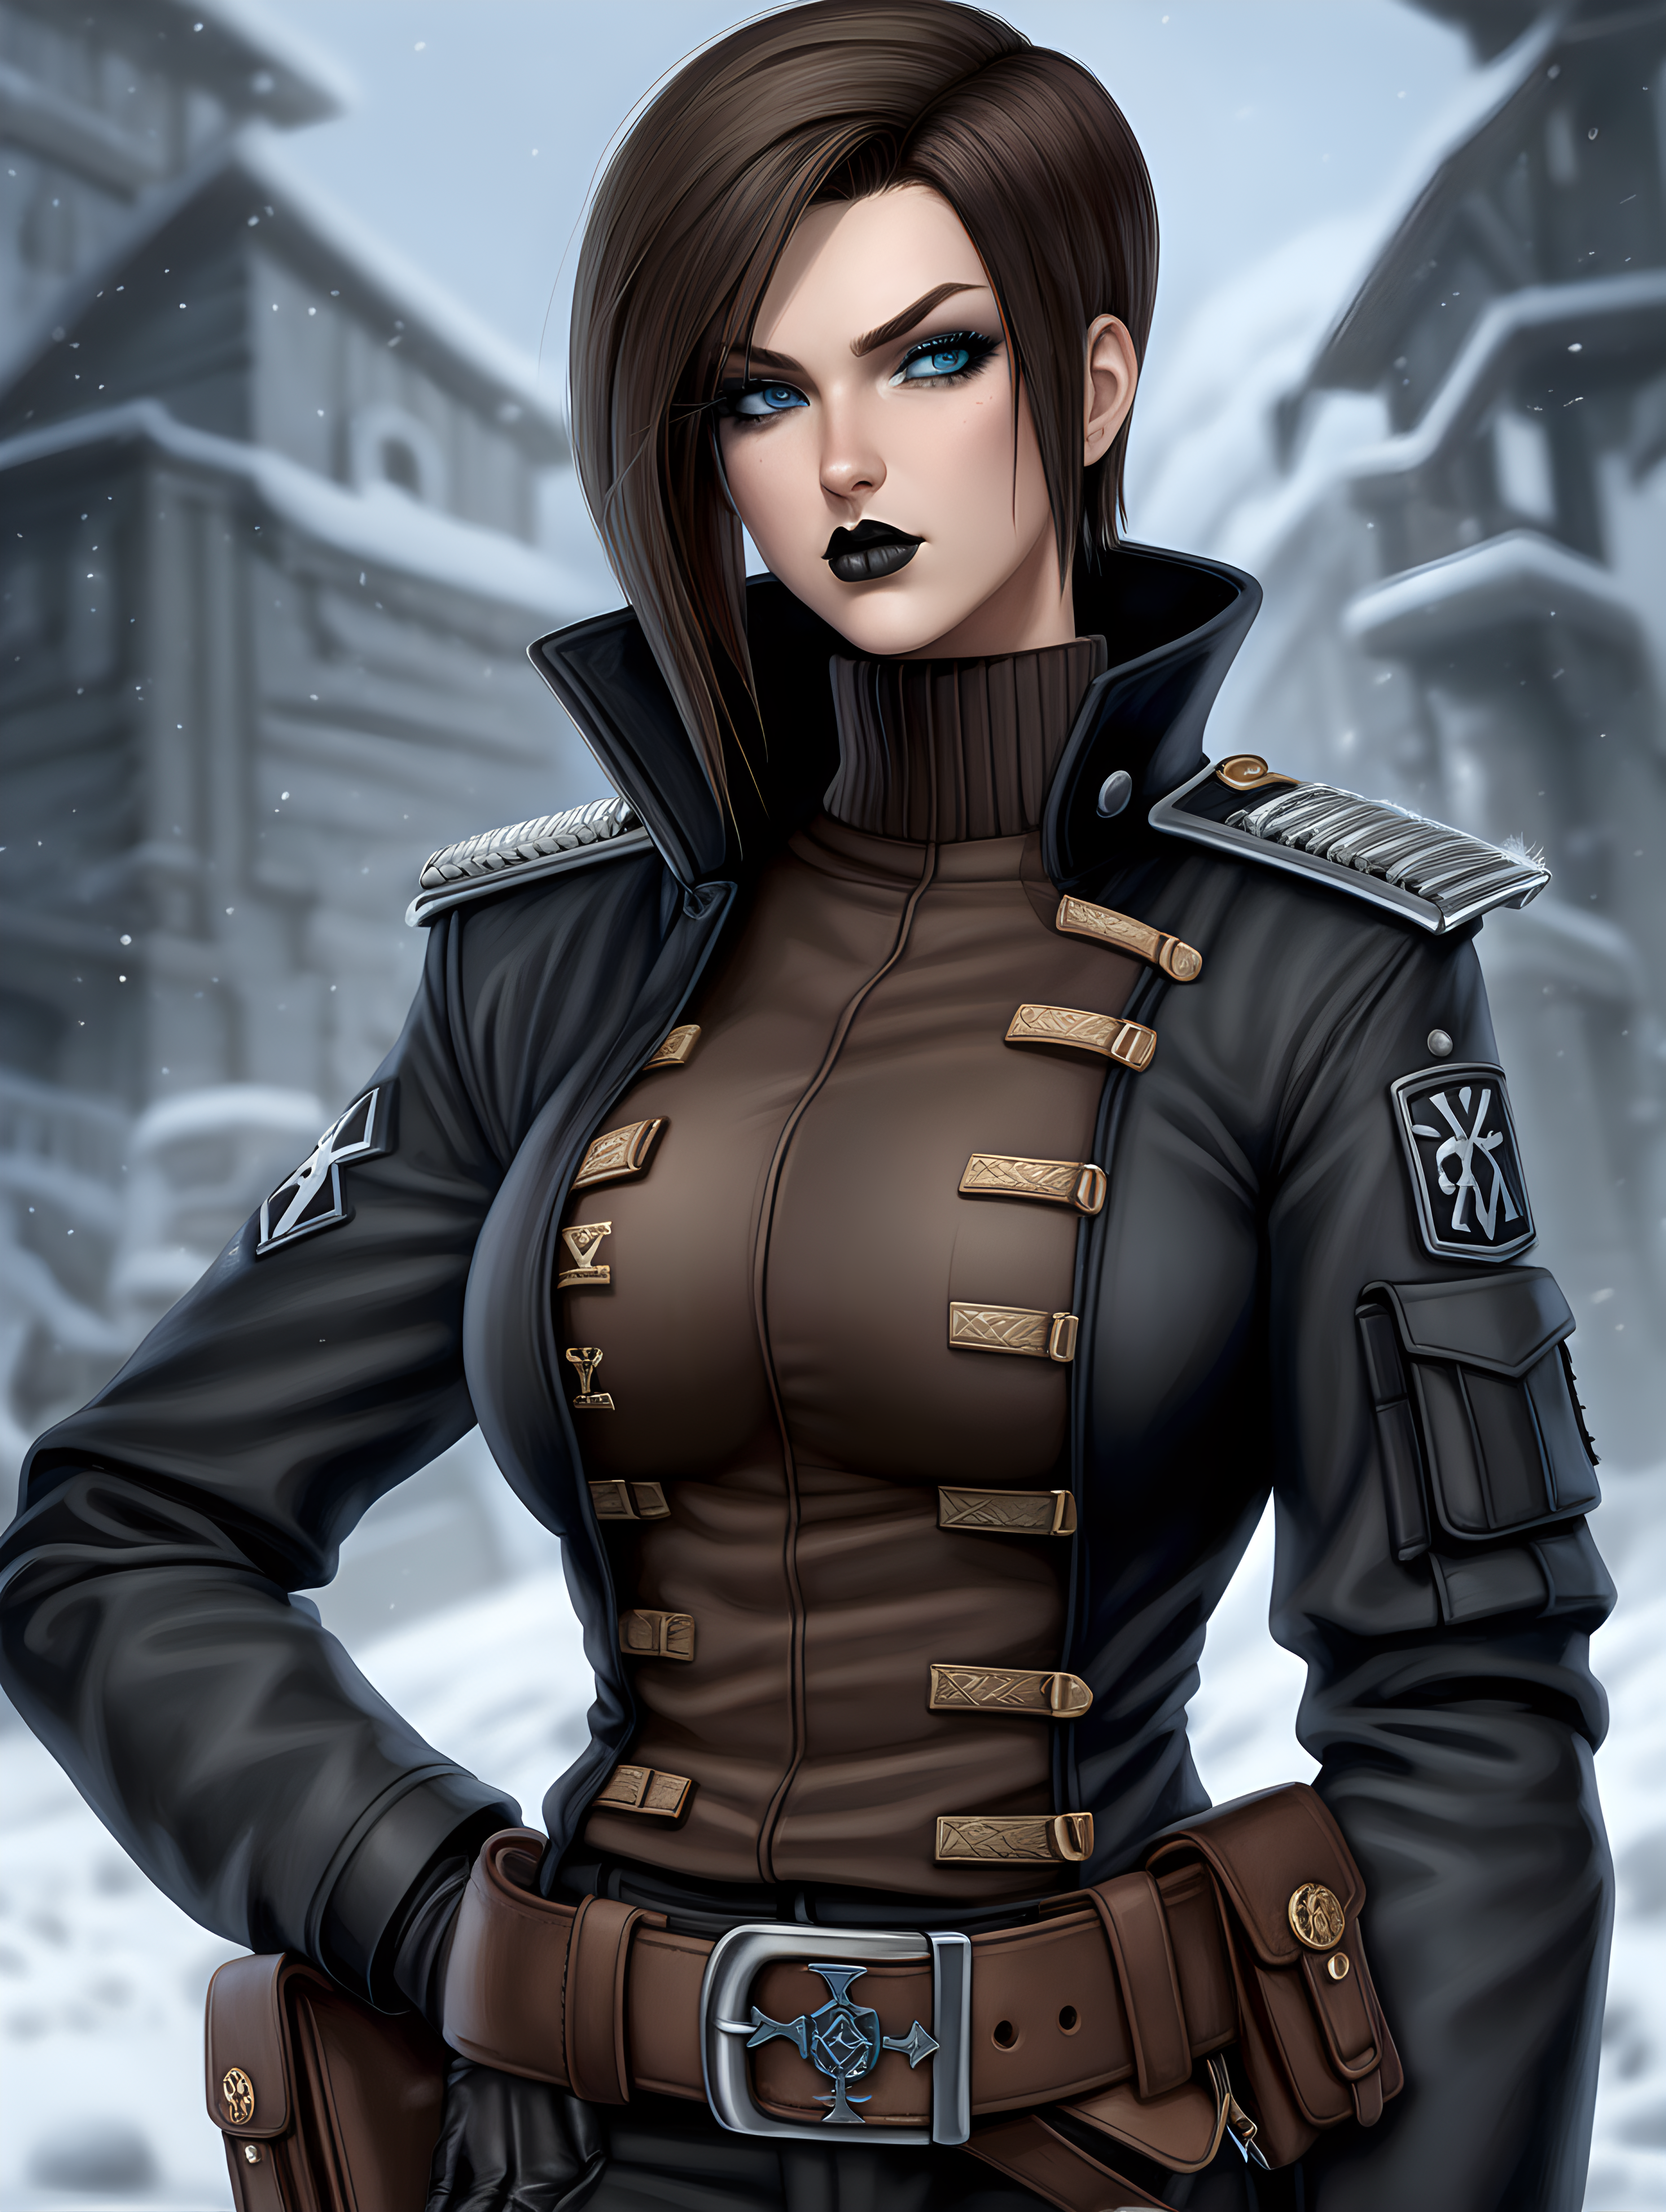 Warhammer 40K young very busty Commissar woman. She has an hourglass shape. She has a very short hair style similar to what Maya, from Borderlands 2, has. Dark black uniform. Dark brown belt has a lot of pouches, grenades, and a black holster attached. Dark brown bandolier around waist. Her dark black uniform jacket fits perfectly and is closed up. She has a lot of eye shadow. Background scene is snowy trench line. She has icy blue eyes. Her uniform has Norse runes. She is wearing warm clothes. Valk nut rune is on collar of her black jacket. She has slightly faded greyish matte lipstick. Her uniform top is colored dark black and skin tight. She has primarily brown hair with black dye highlights. She is wearing skin tight mud brown colored pants.